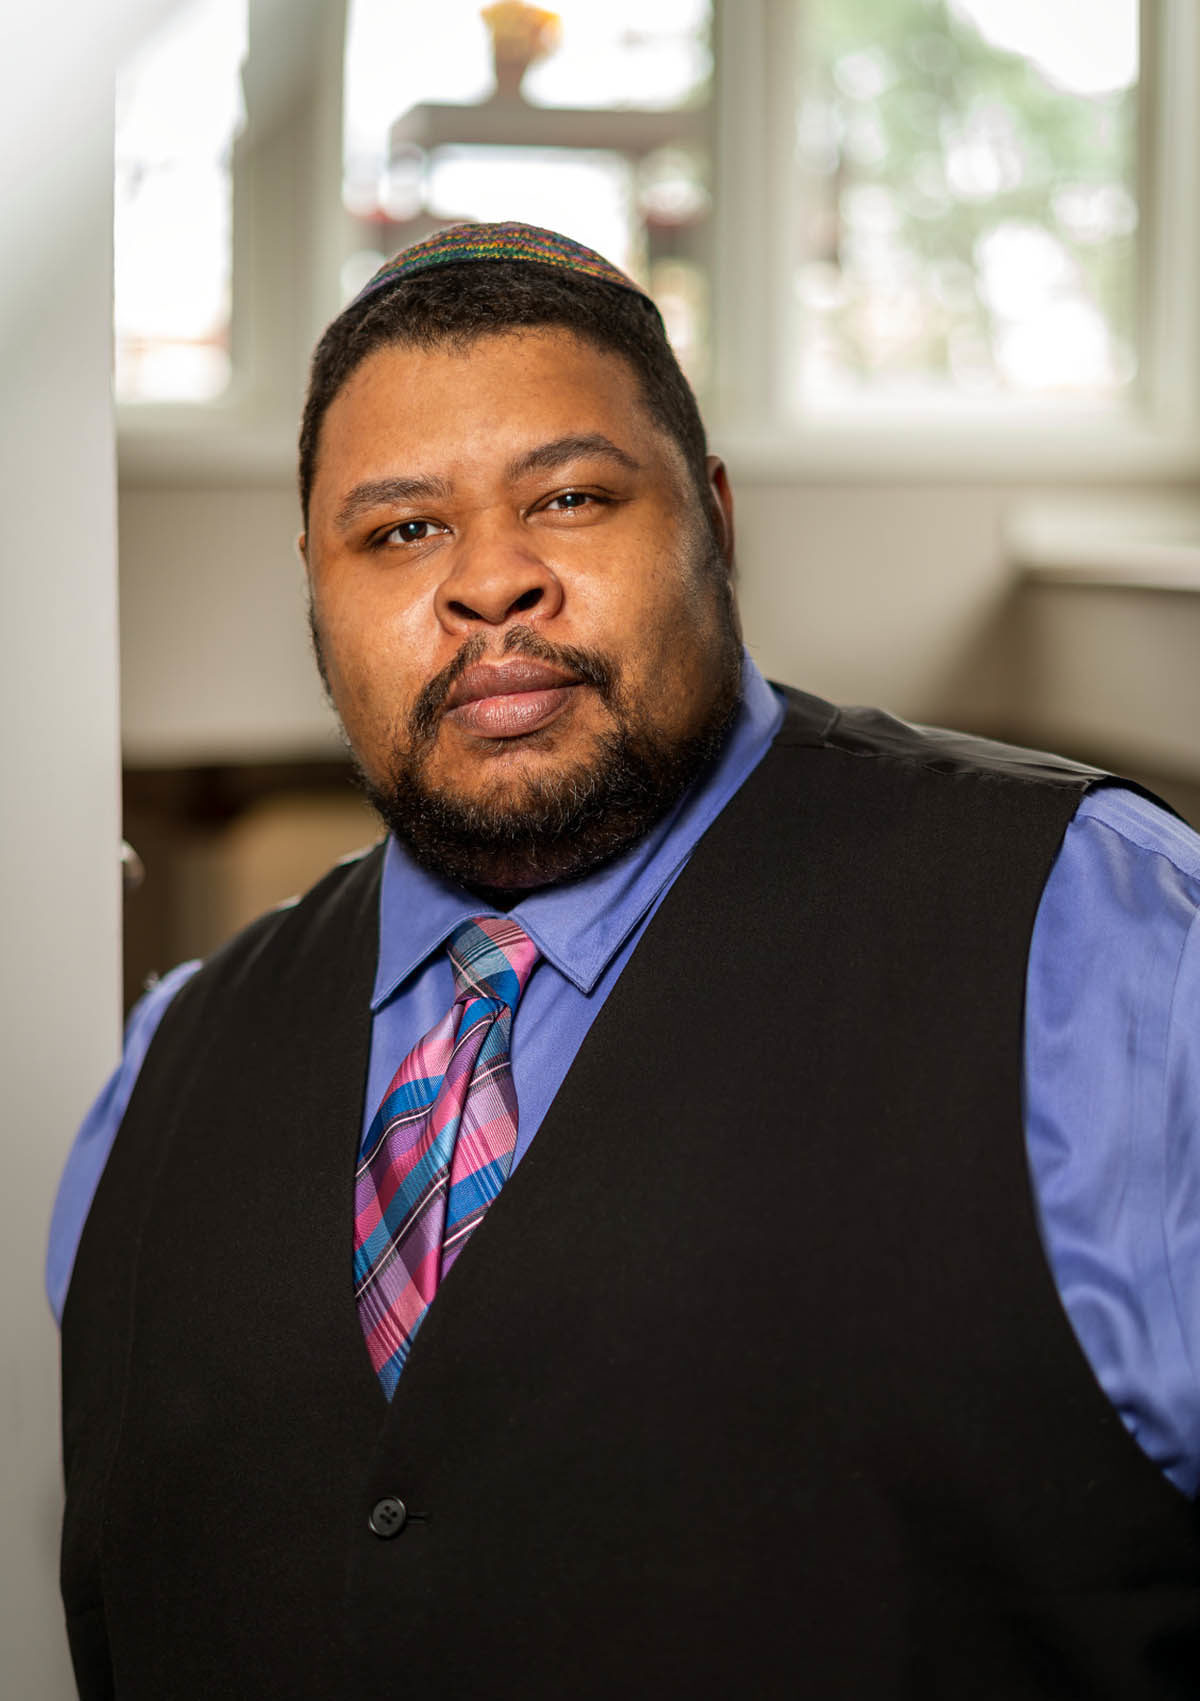 Headshot of Michael Twitty, who wears a black vest over a blue shirt with a pink and blue tie.